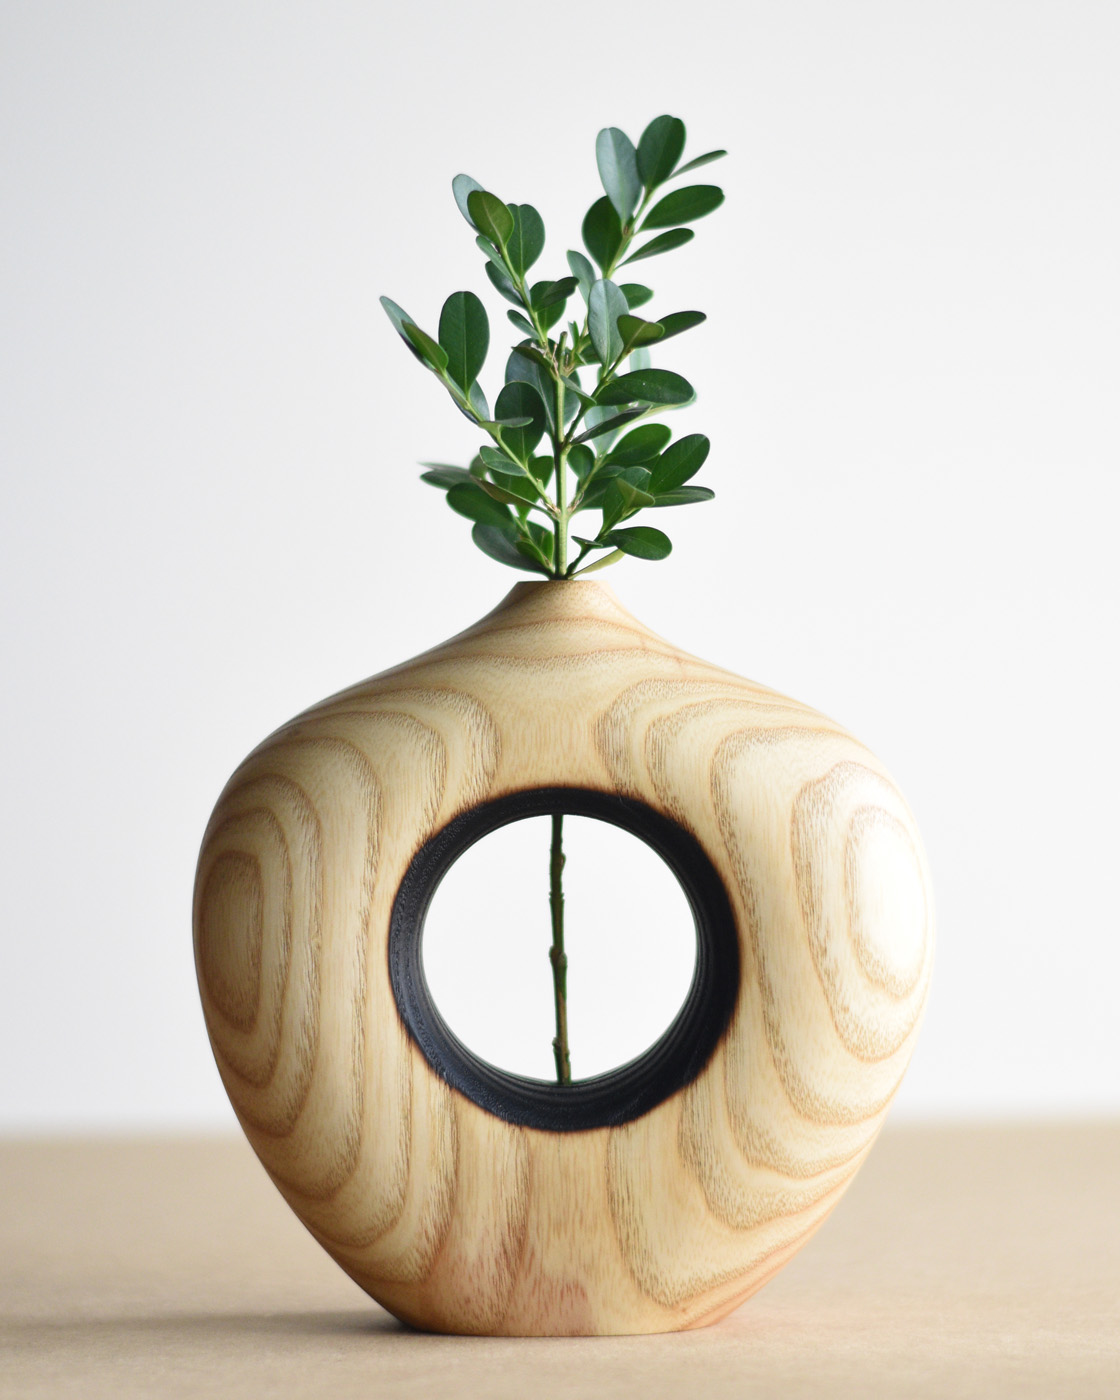 wood bud vase with green leaves